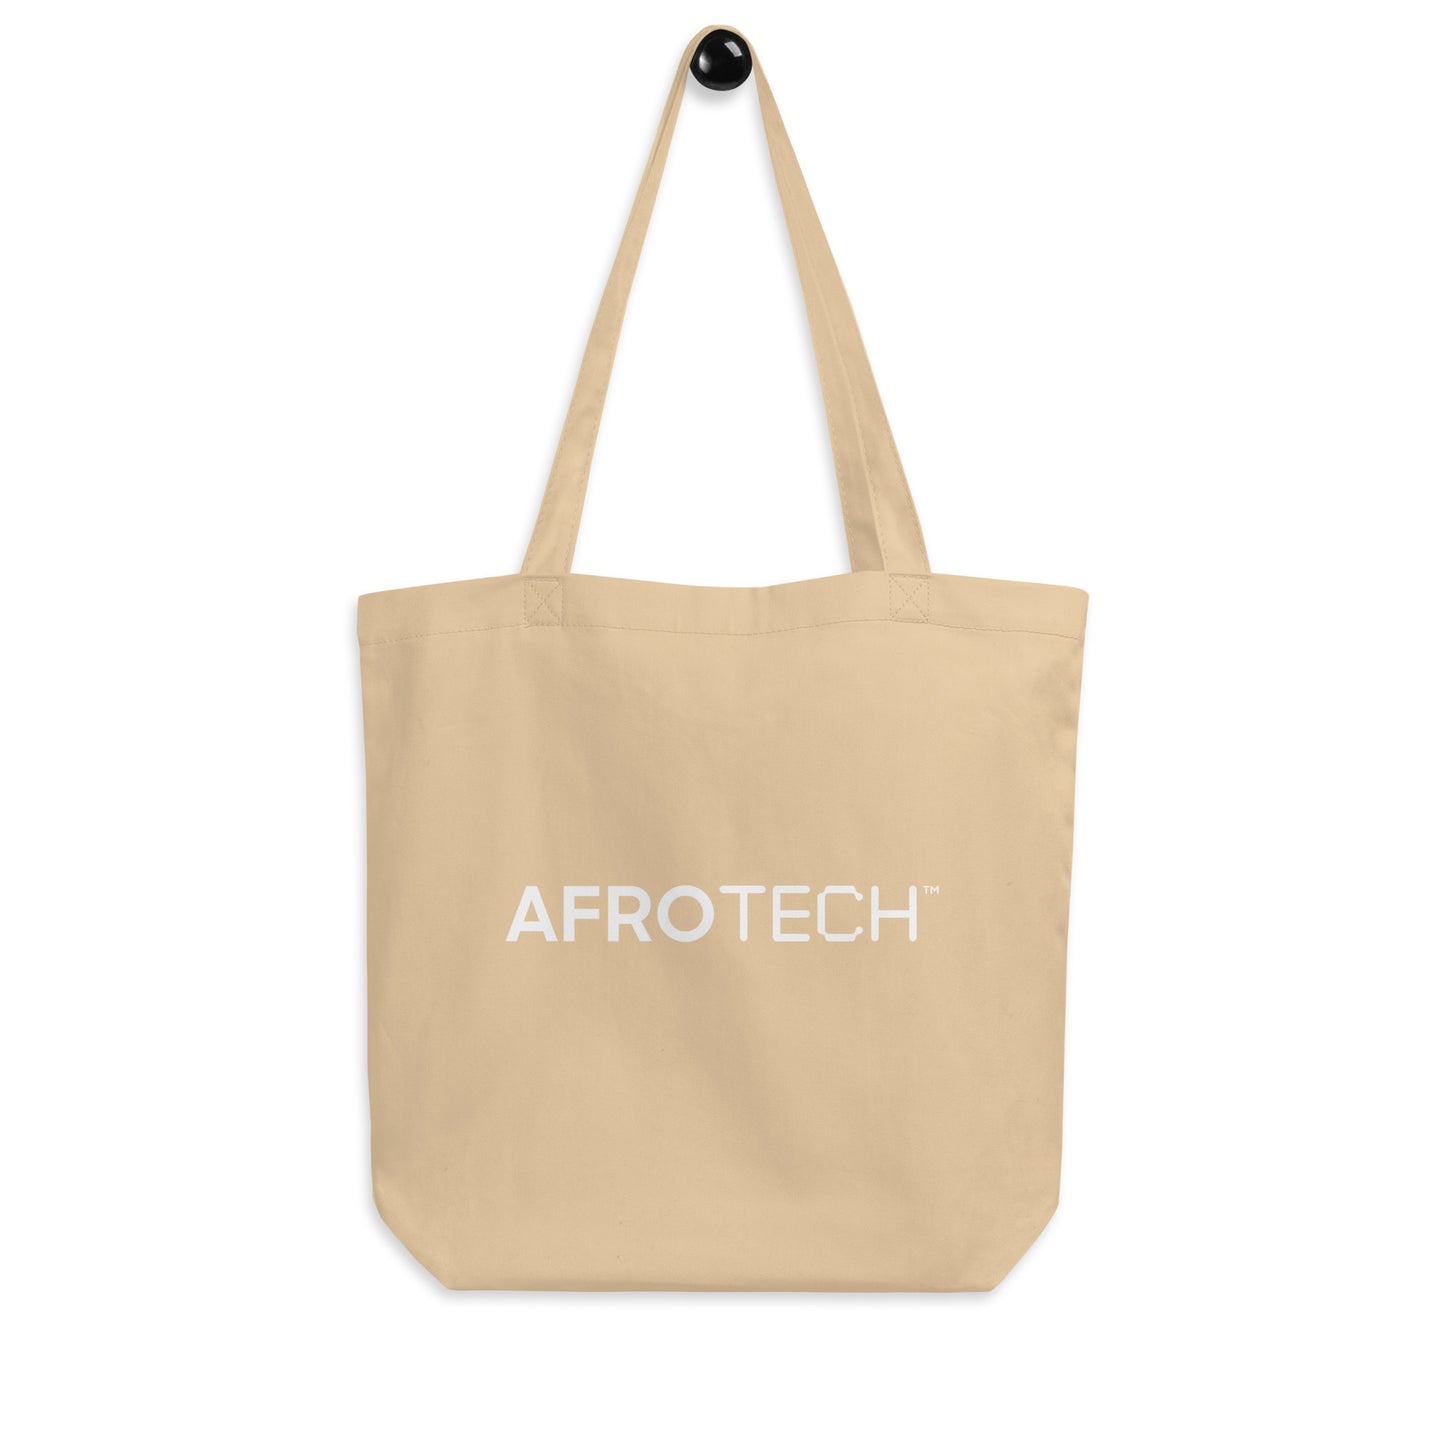 AFROTECH Eco Tote Bag